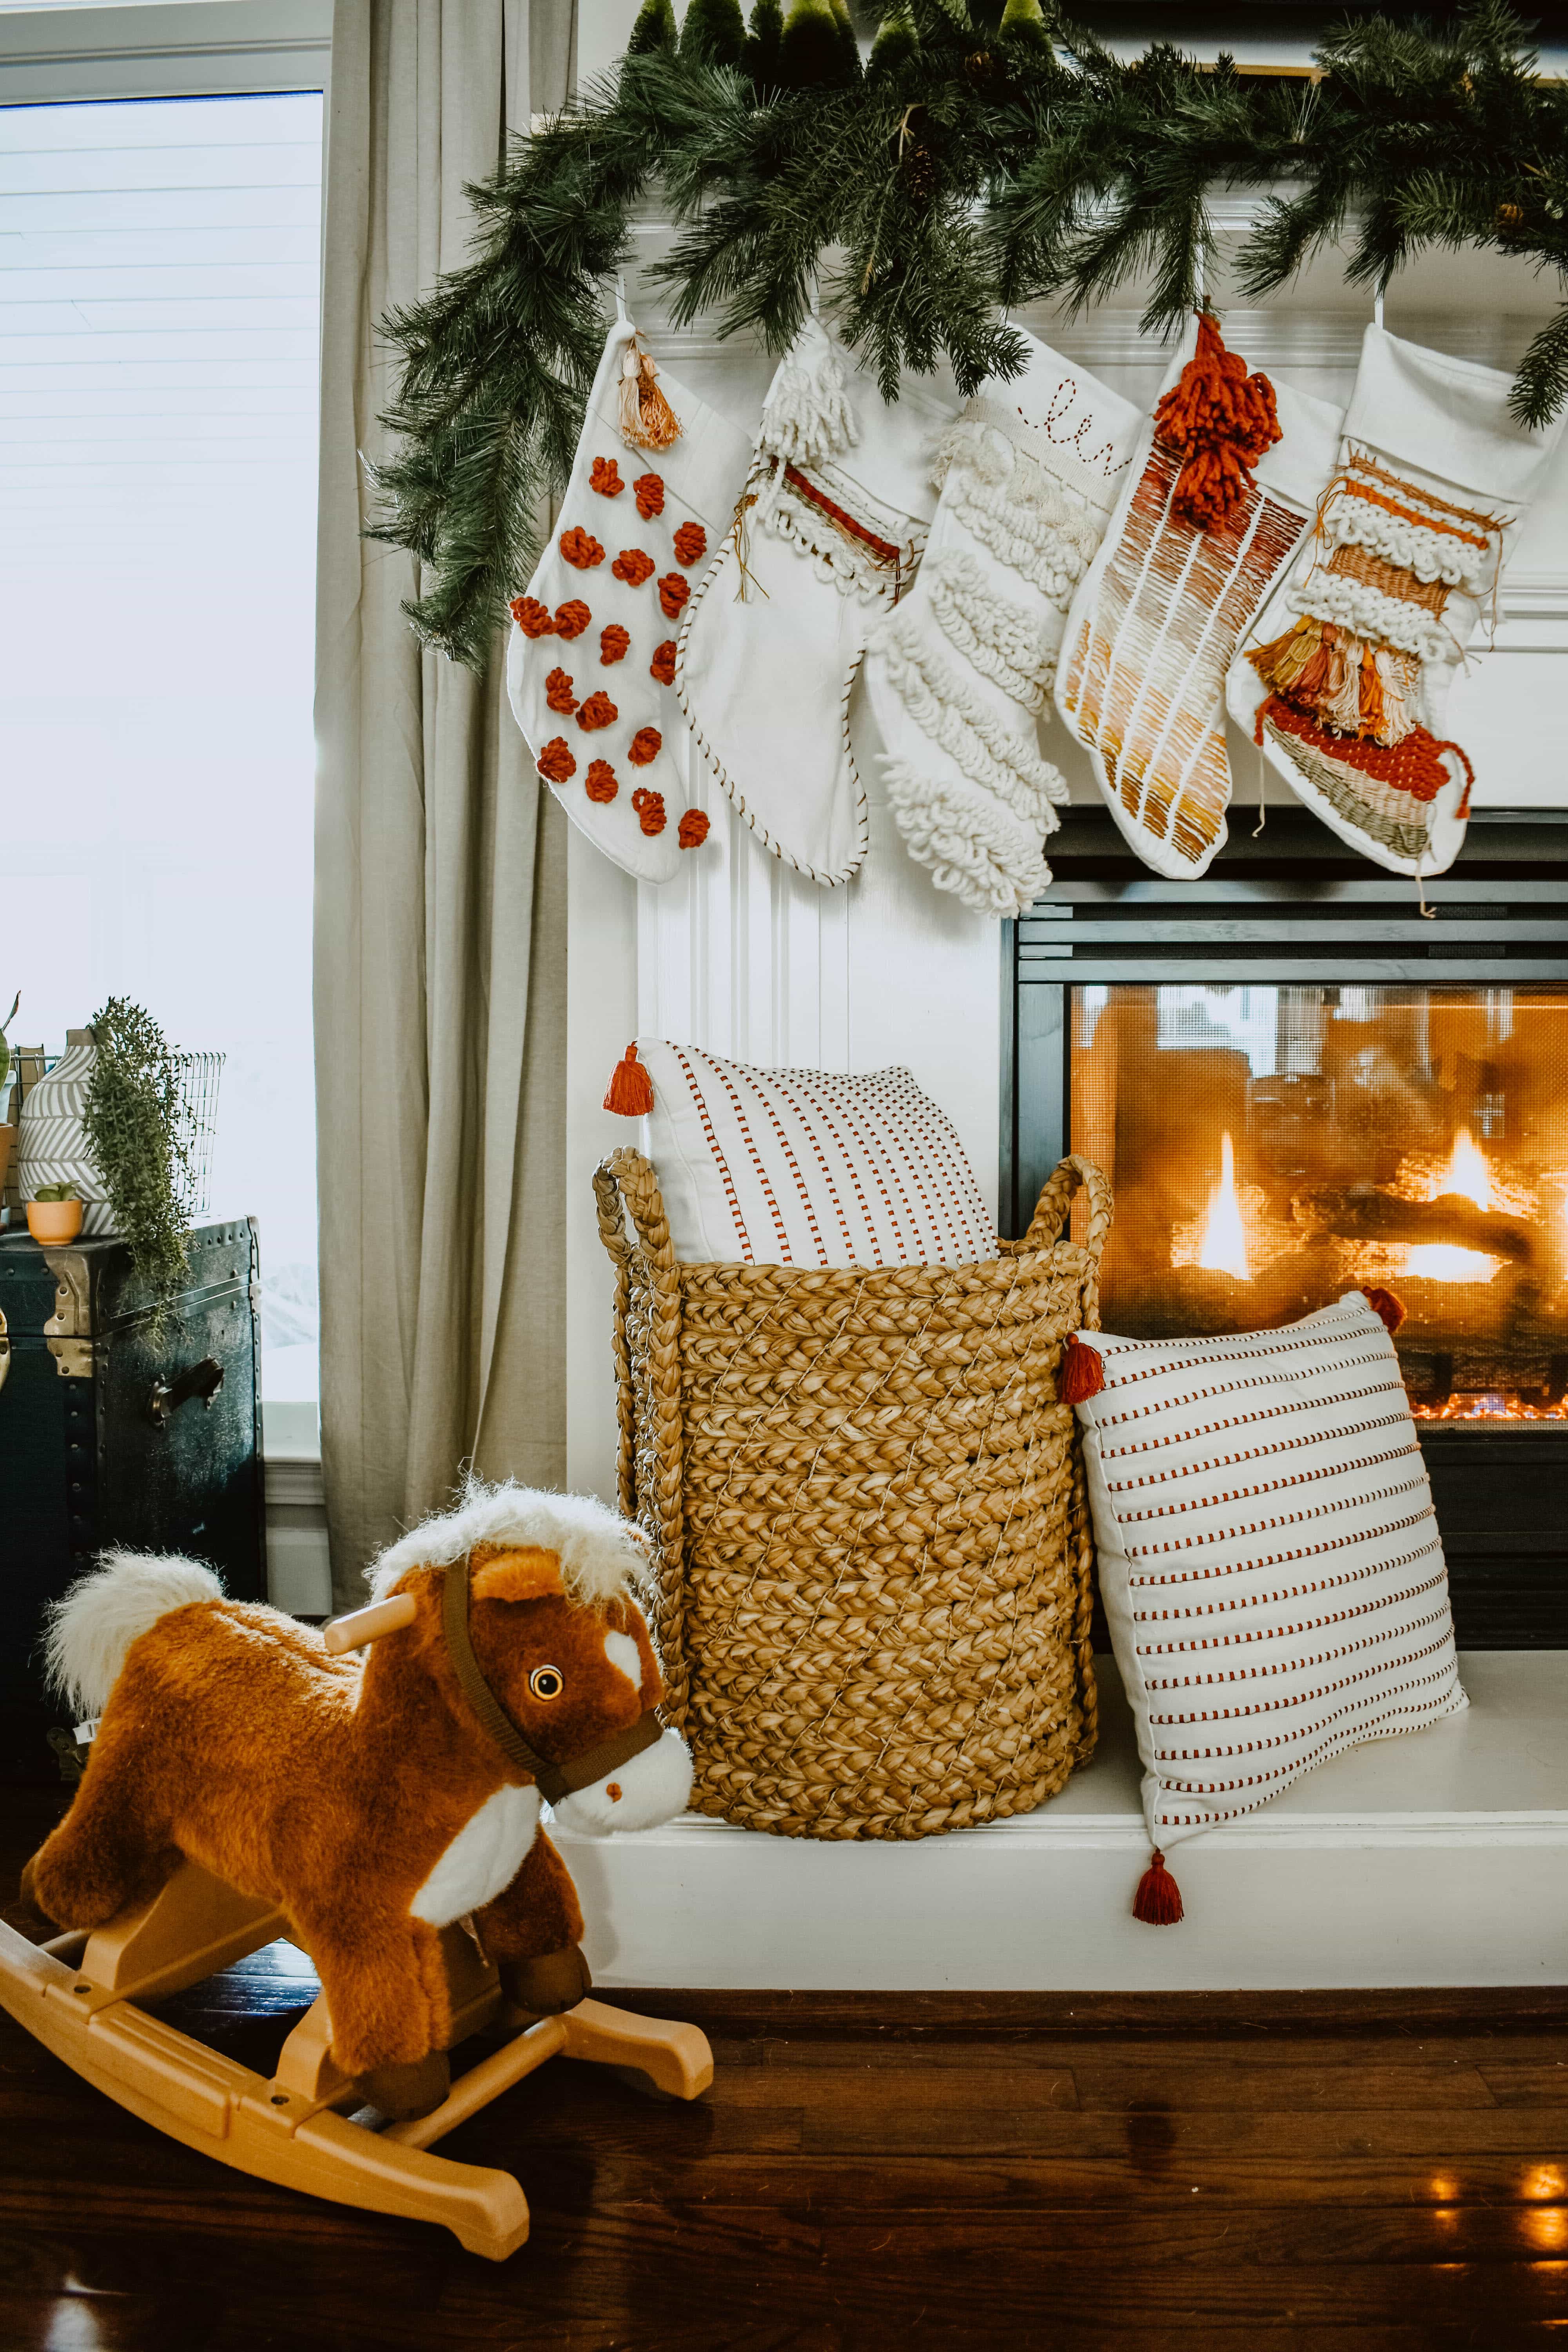 christmas fireplace with stockings